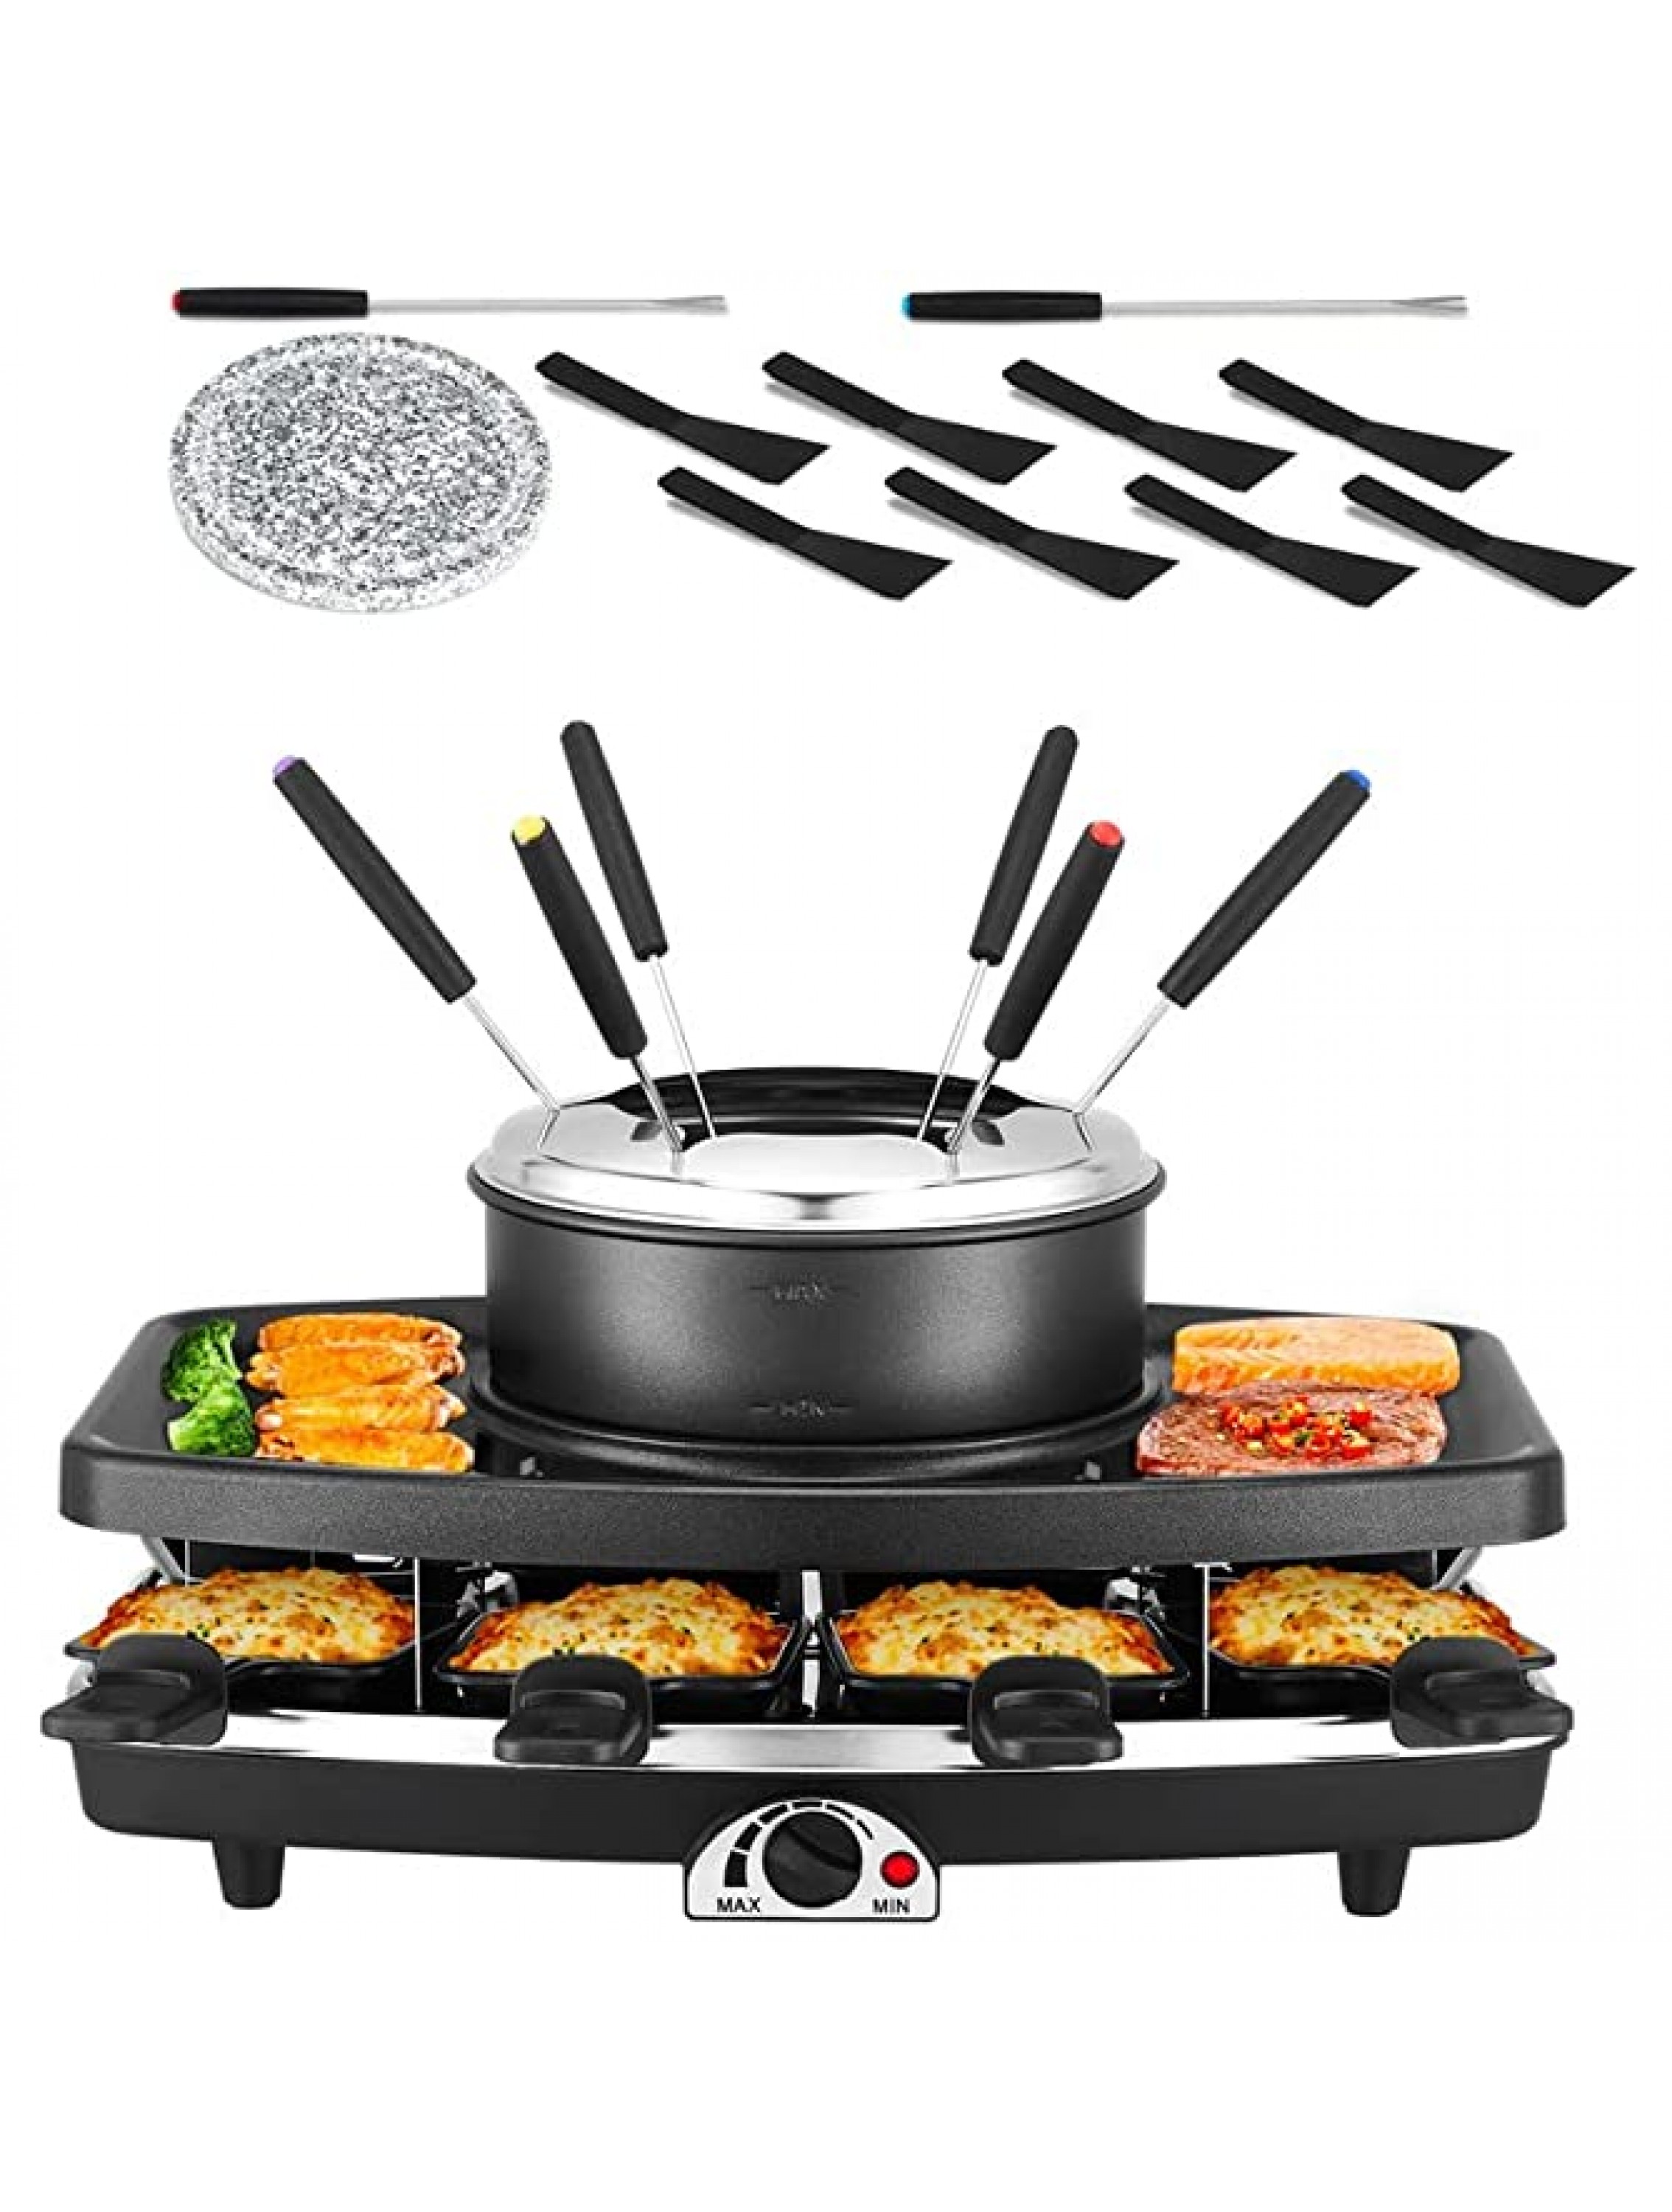 Electric Raclette ​BBQ Grill with Fondue Pot Sets Portable Korean Table Grill Electric Indoor Cheese Raclette Dual Adjustable Thermostats 8 People Serve Perfect for Parties and Family Fun - B0S0QCHLH